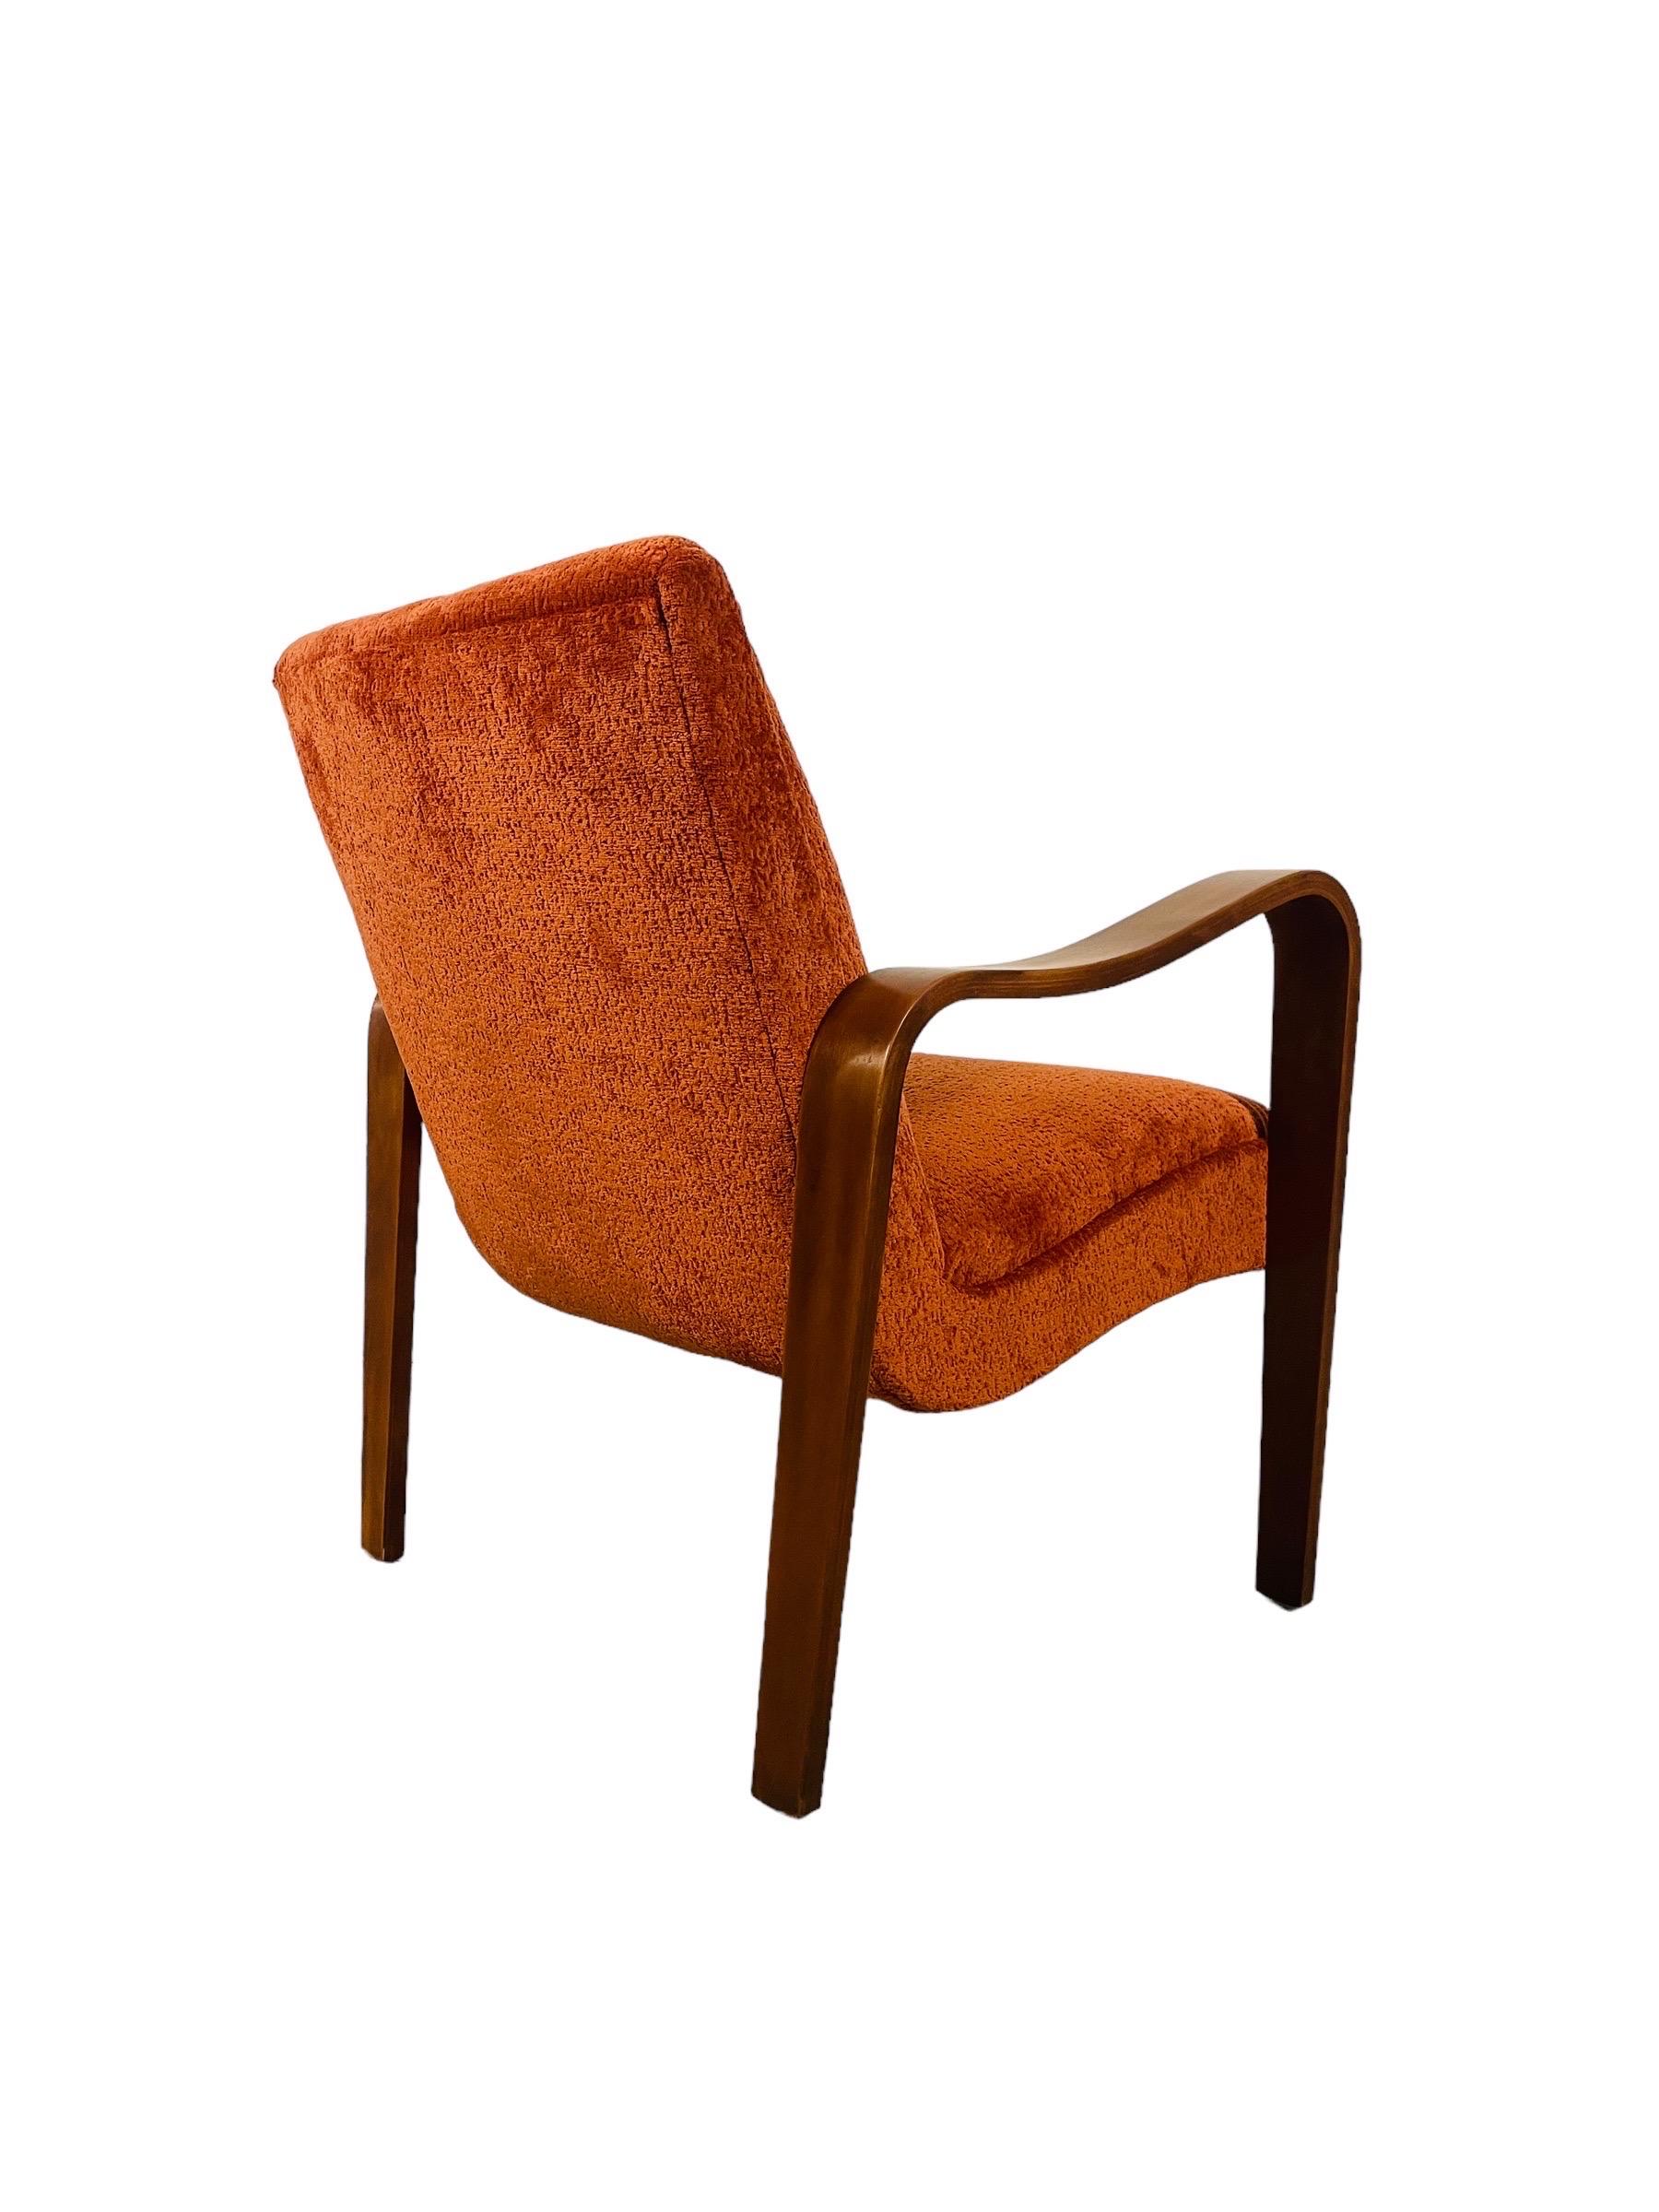 Mid Century Modern Thonet Lounge Chair Reupholstered 1